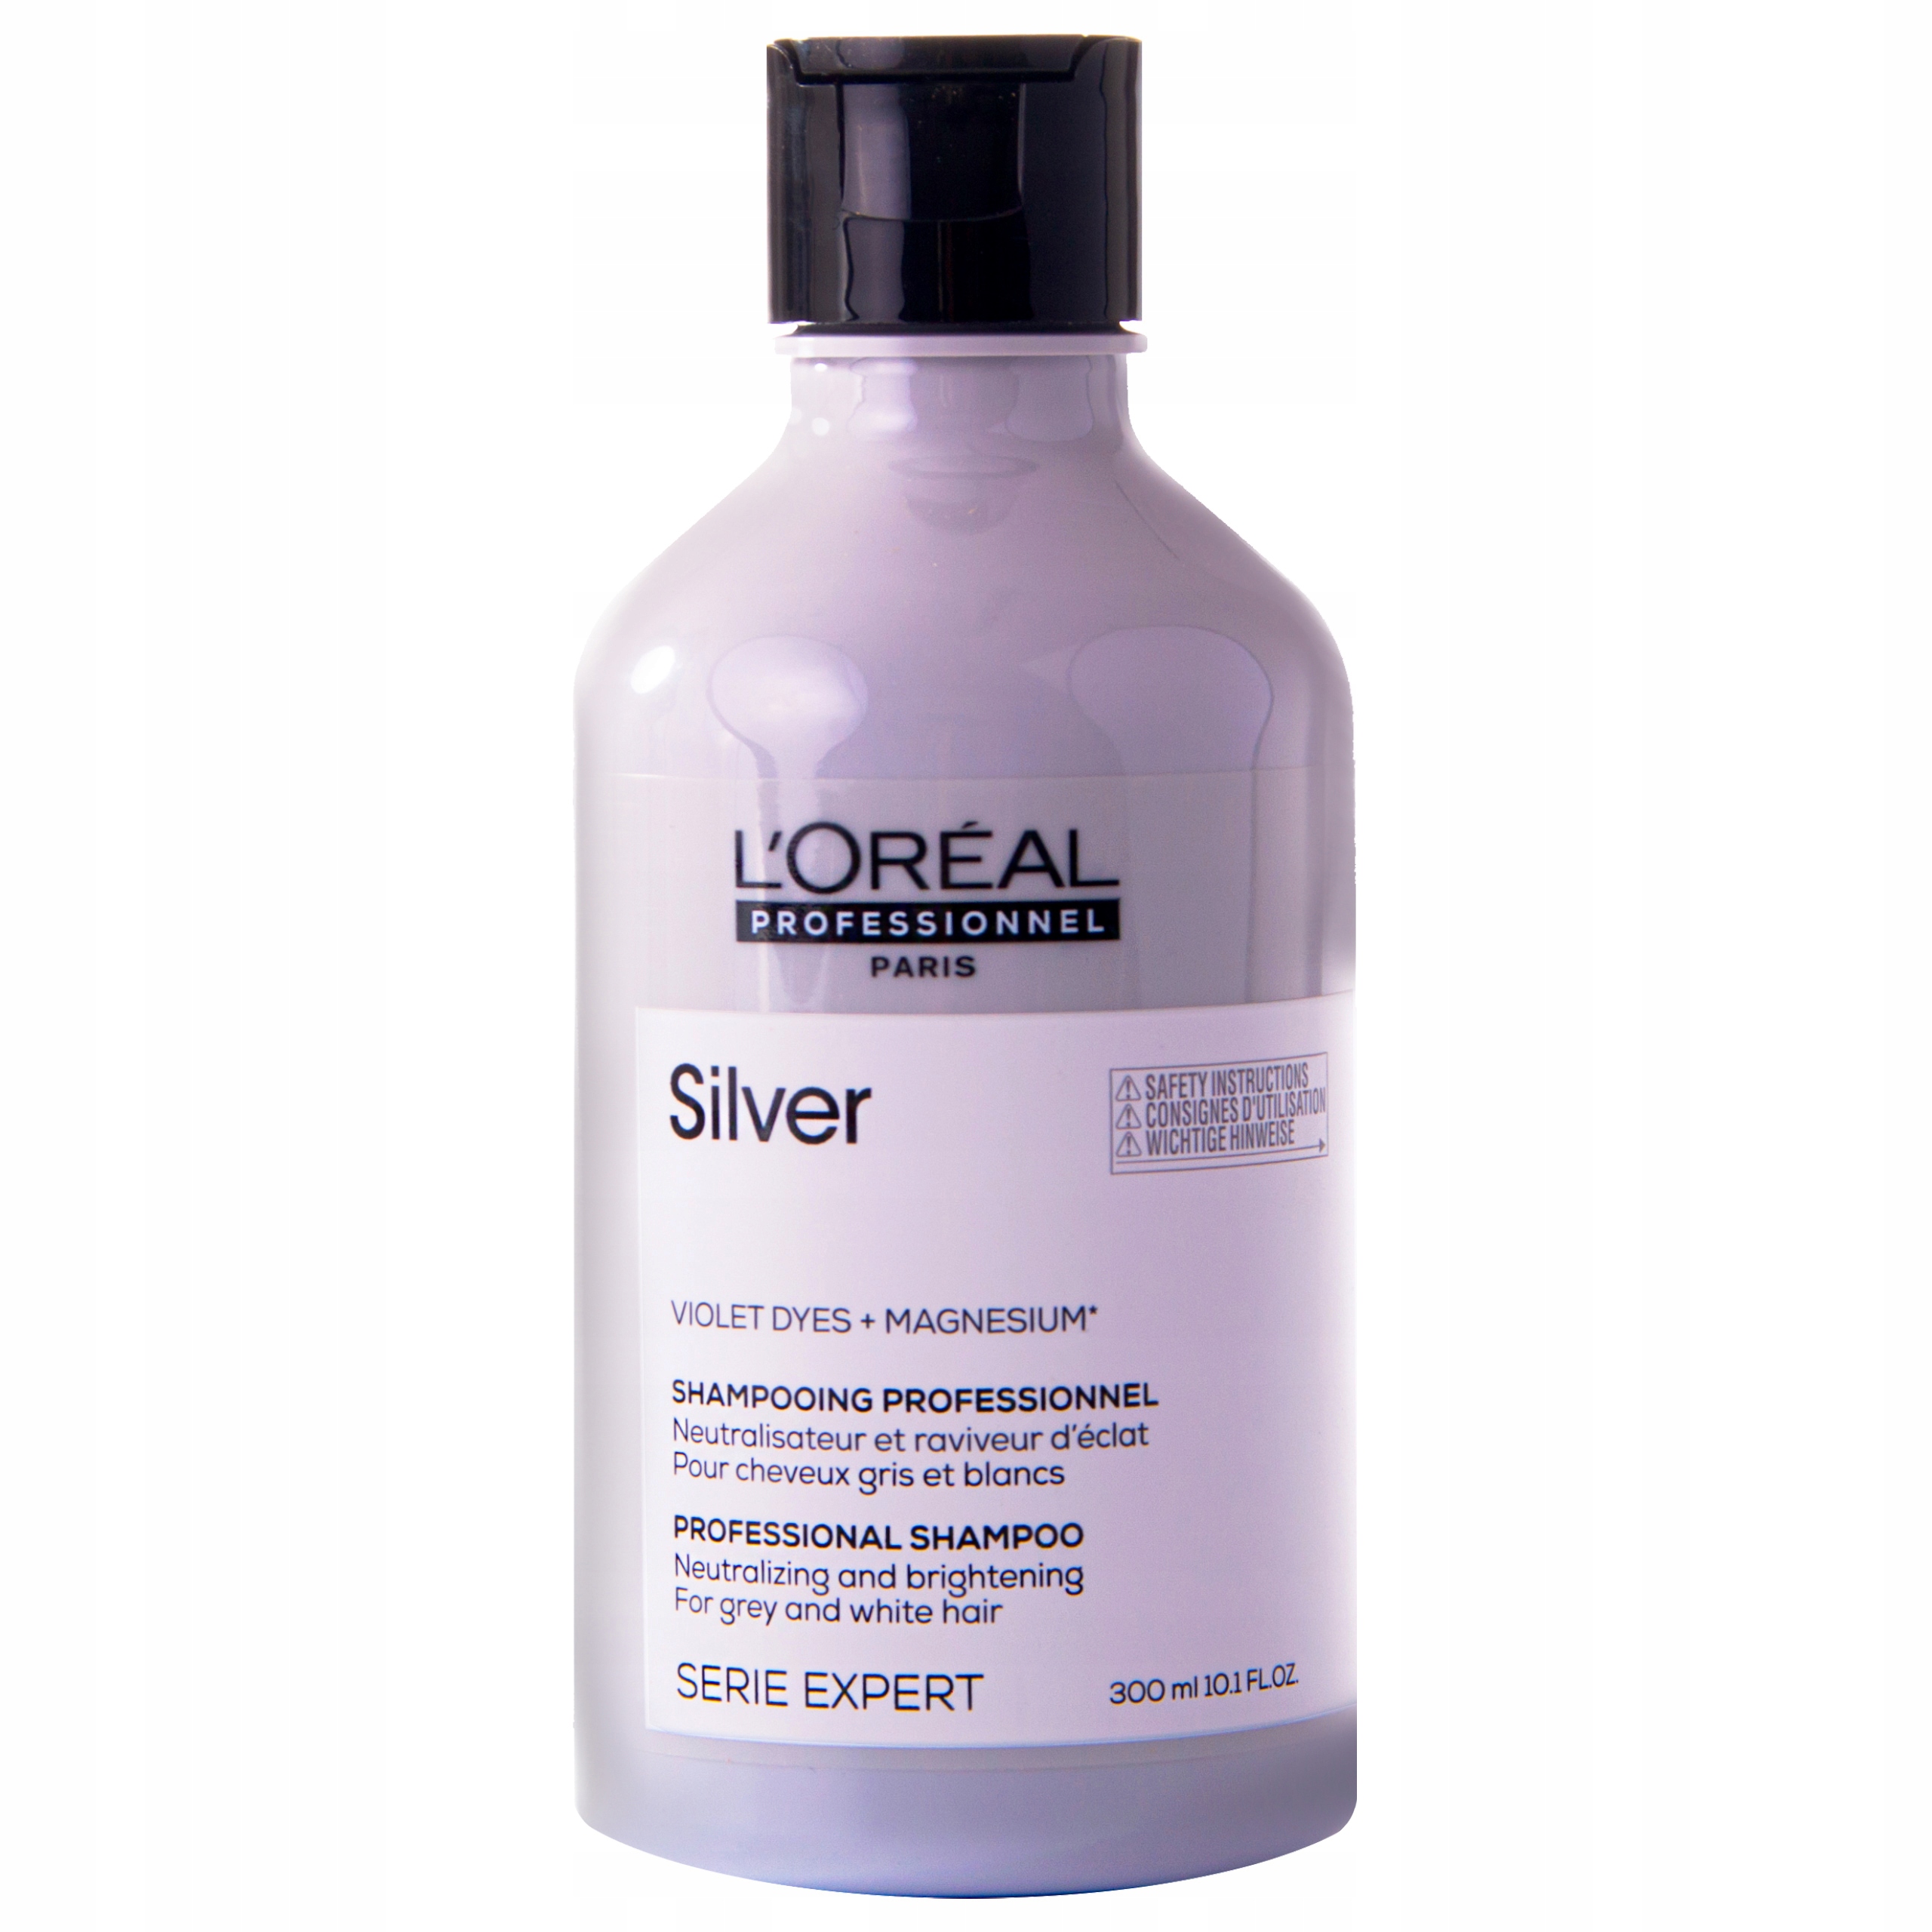 szampon loreal fioletowy